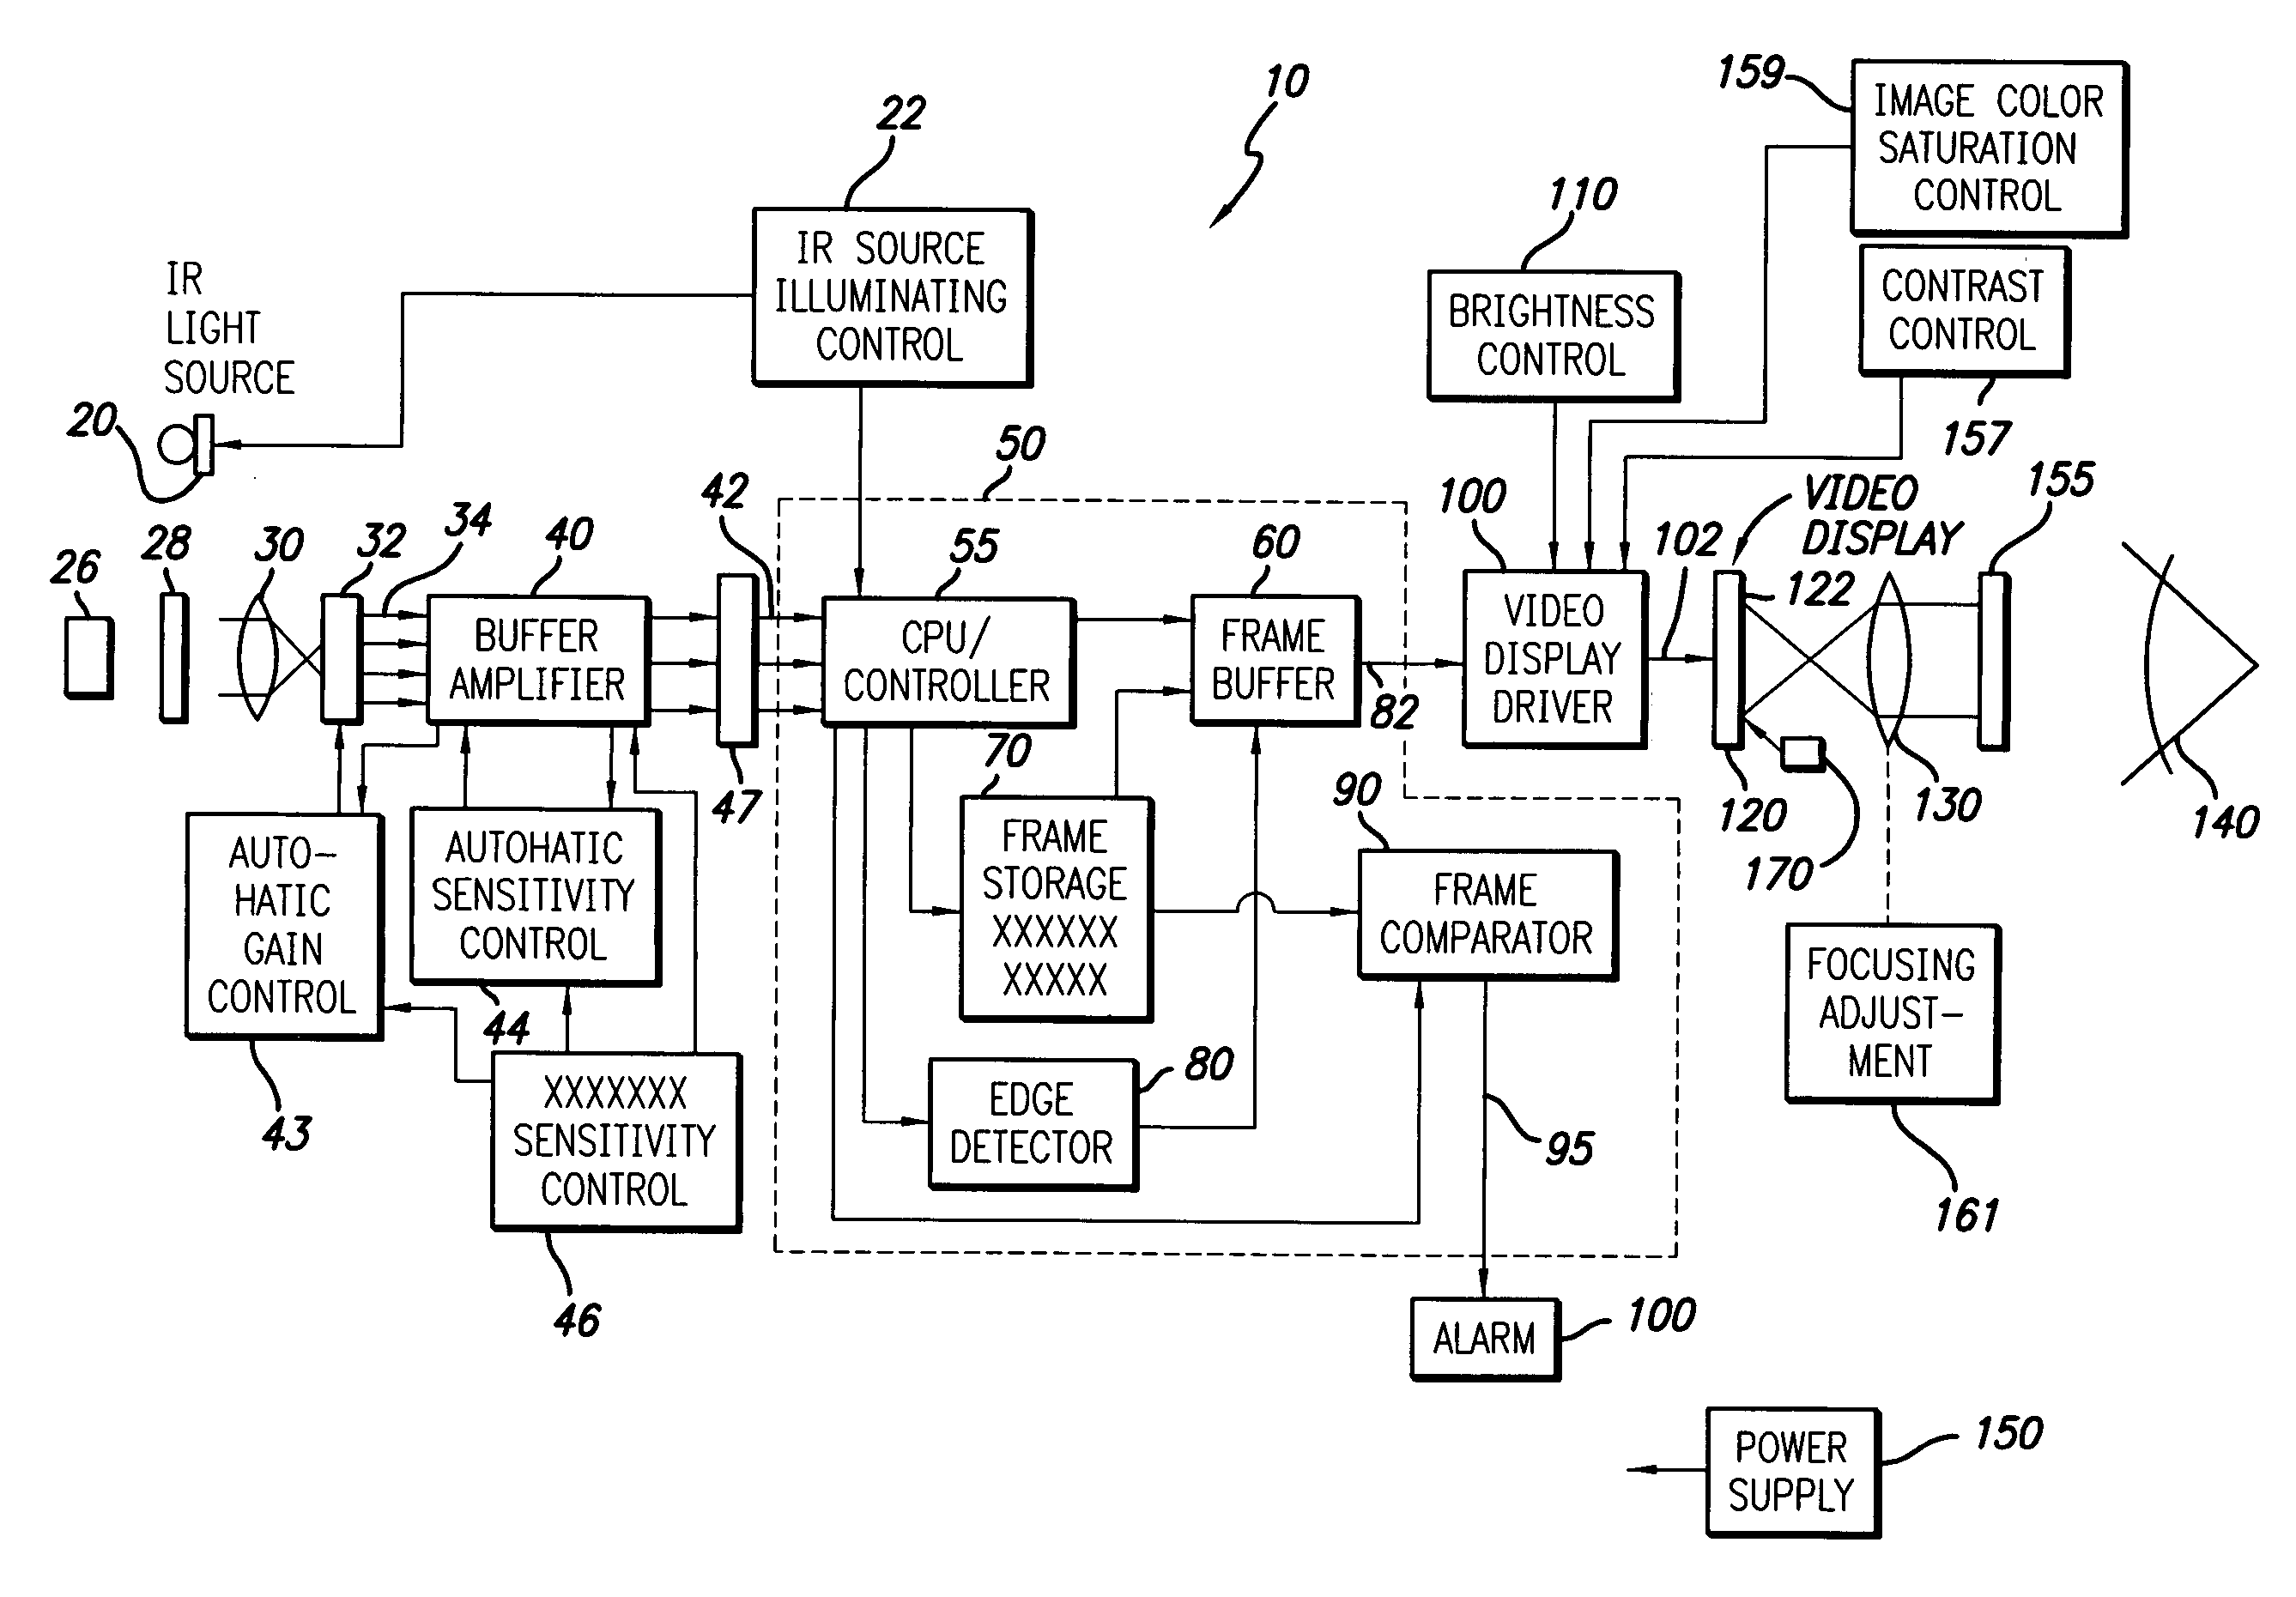 Infrared toy viewing scope and games utilizing infrared radiation